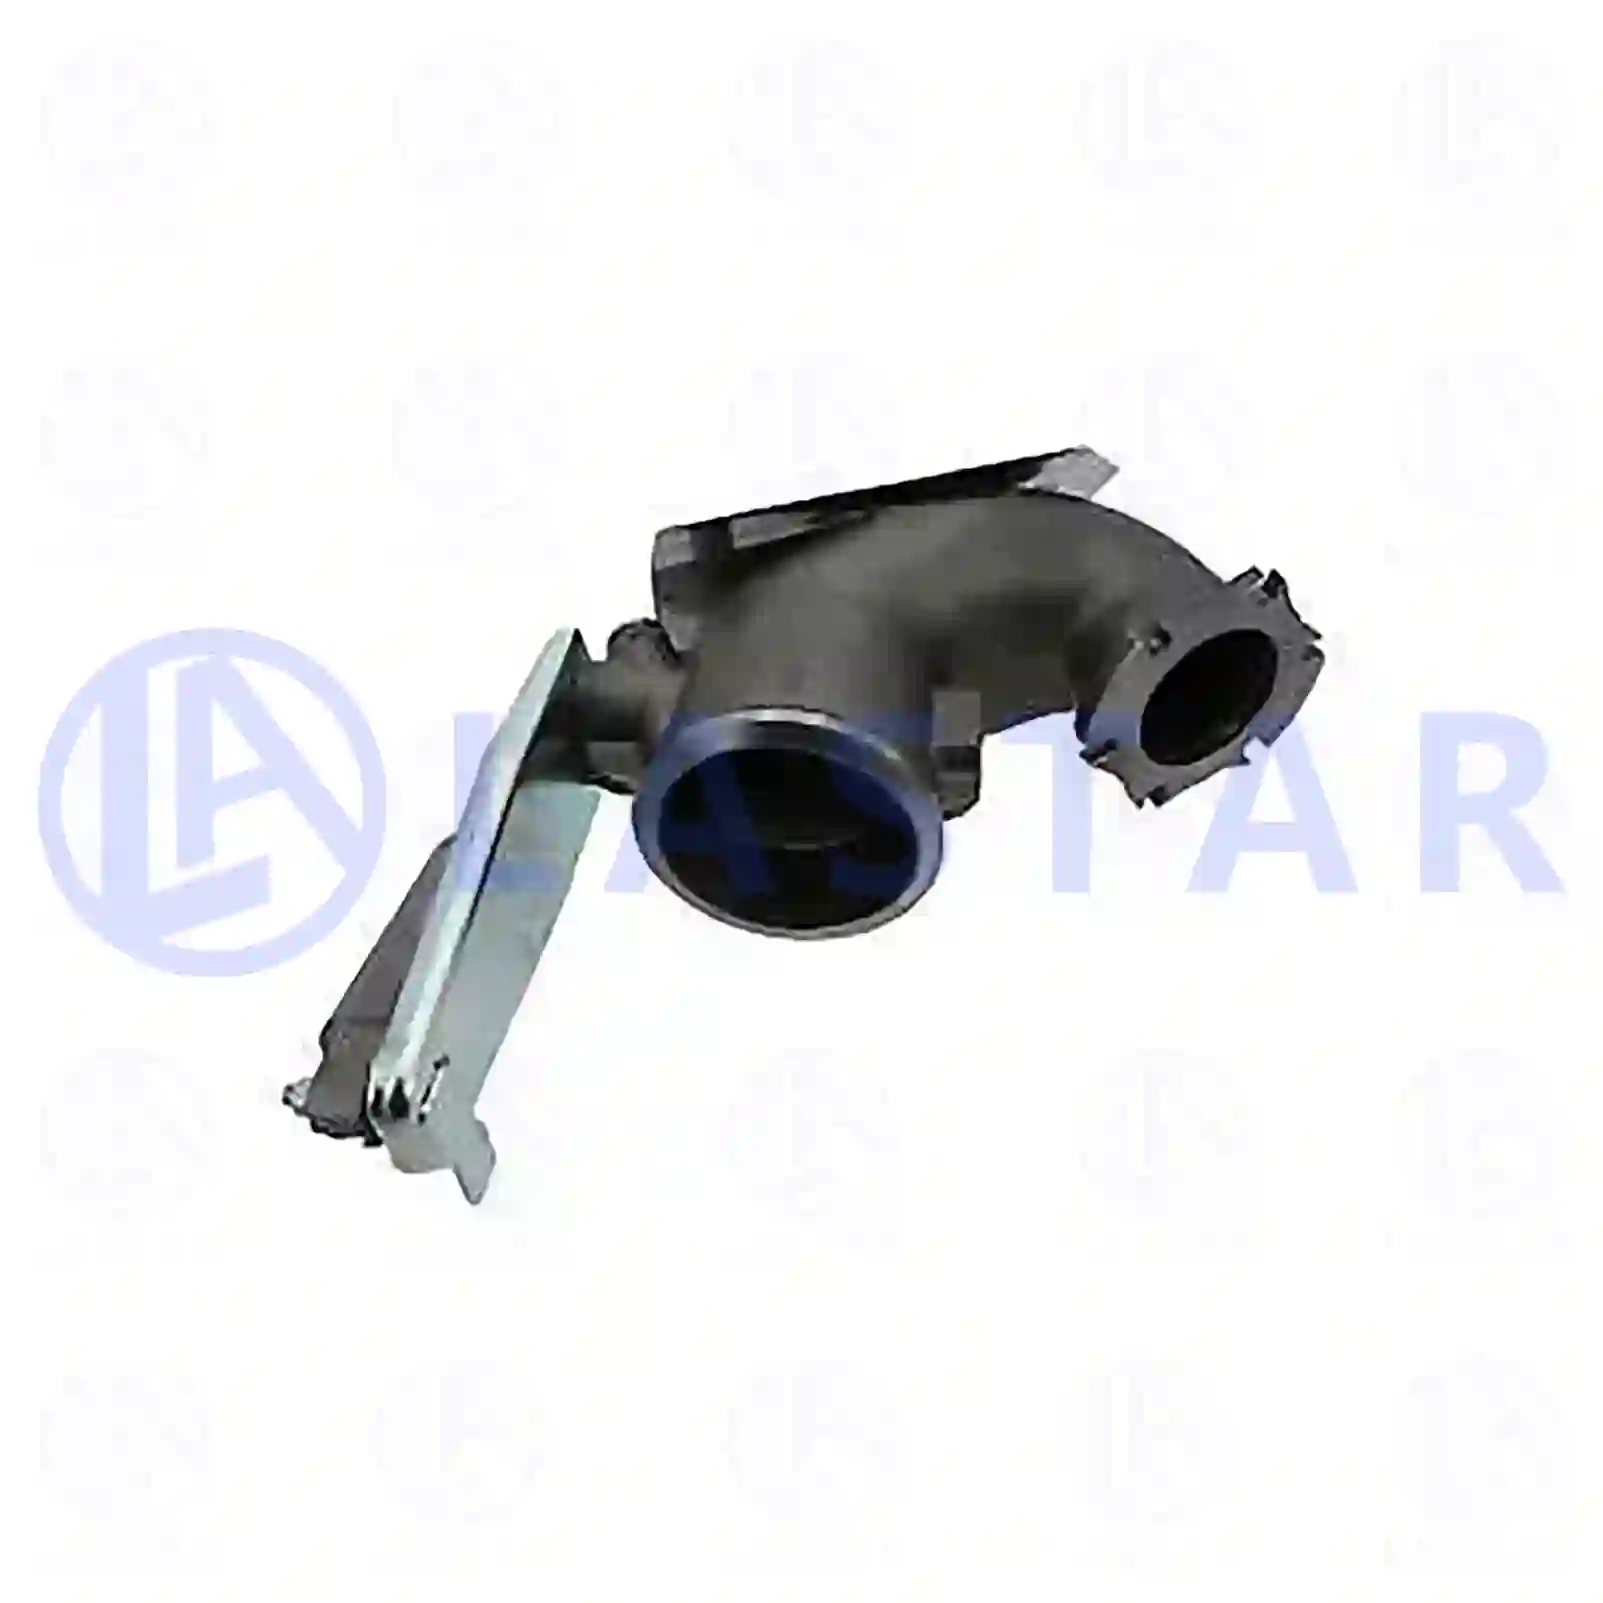 Exhaust manifold, with throttle, 77700156, 51152016202, 51152016216, 51152016321 ||  77700156 Lastar Spare Part | Truck Spare Parts, Auotomotive Spare Parts Exhaust manifold, with throttle, 77700156, 51152016202, 51152016216, 51152016321 ||  77700156 Lastar Spare Part | Truck Spare Parts, Auotomotive Spare Parts